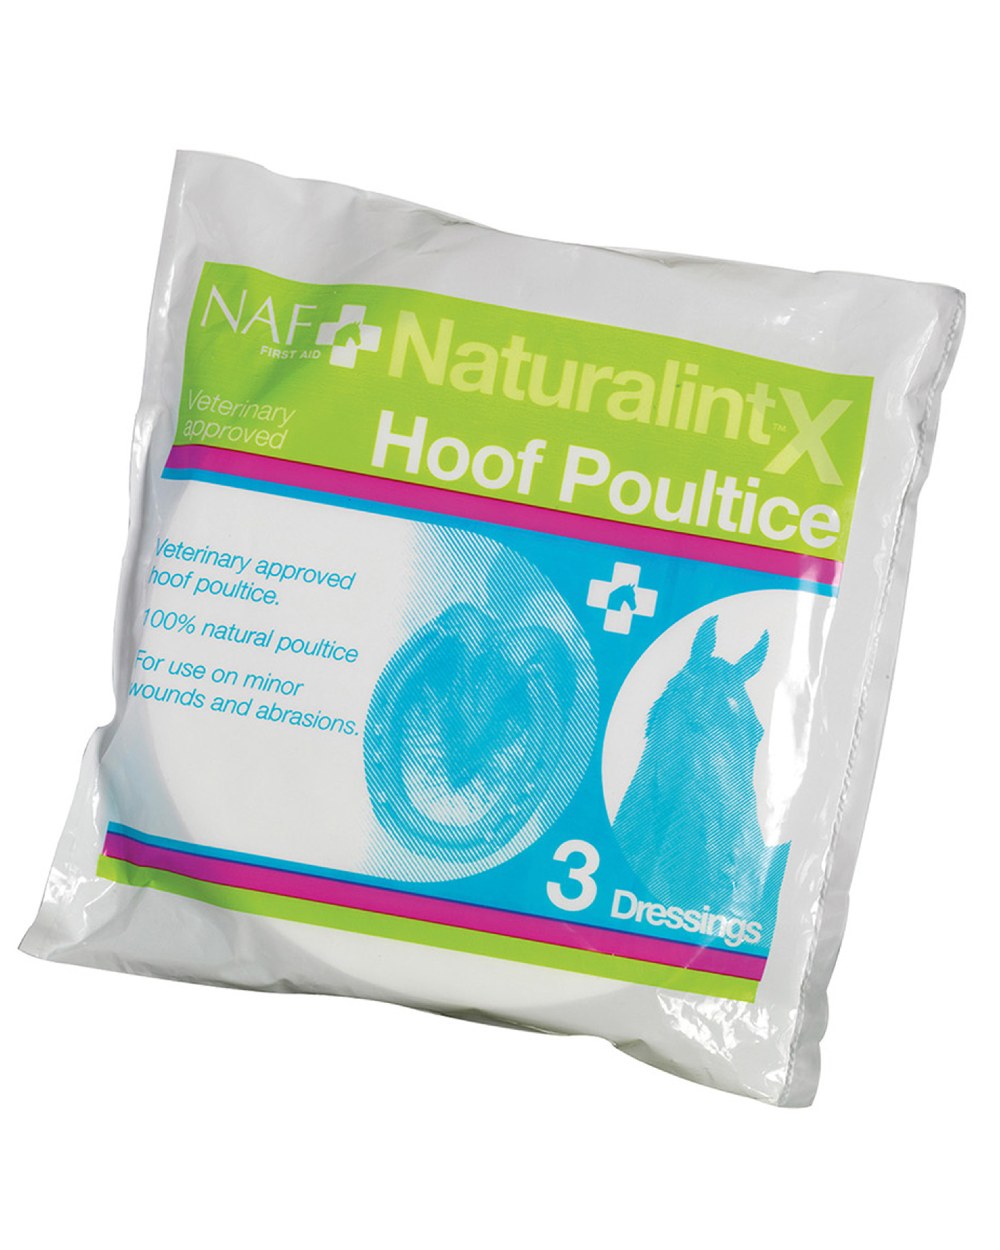 NAF Naturalintx Hoof Poultice pack of 3 on white background